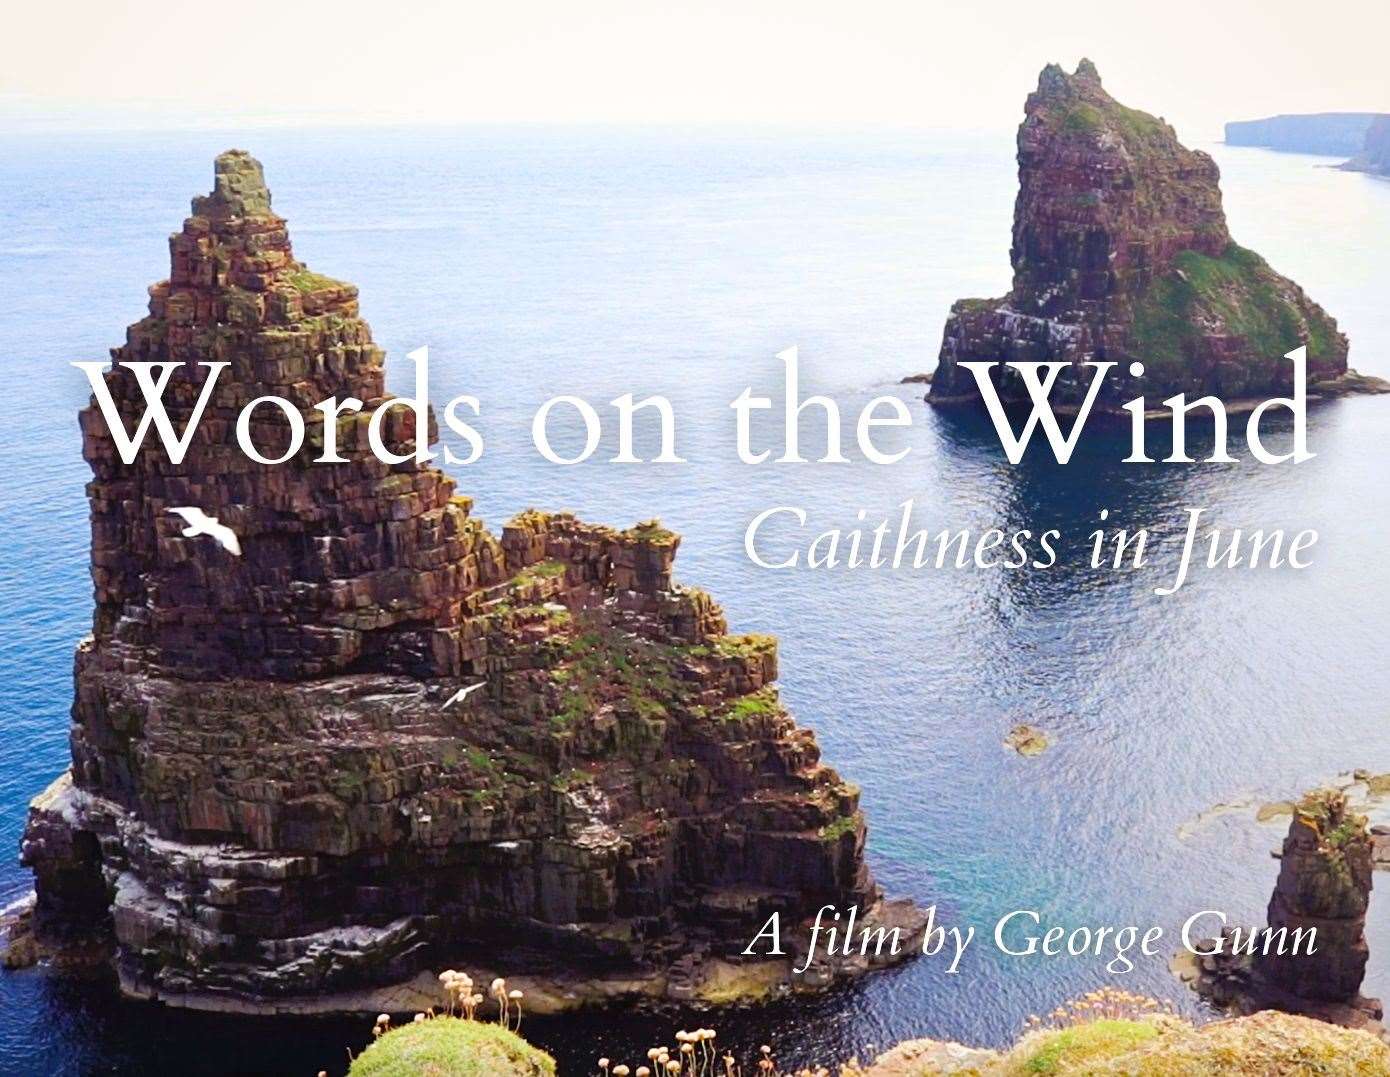 Words on the Wind: A film by George Gunn.